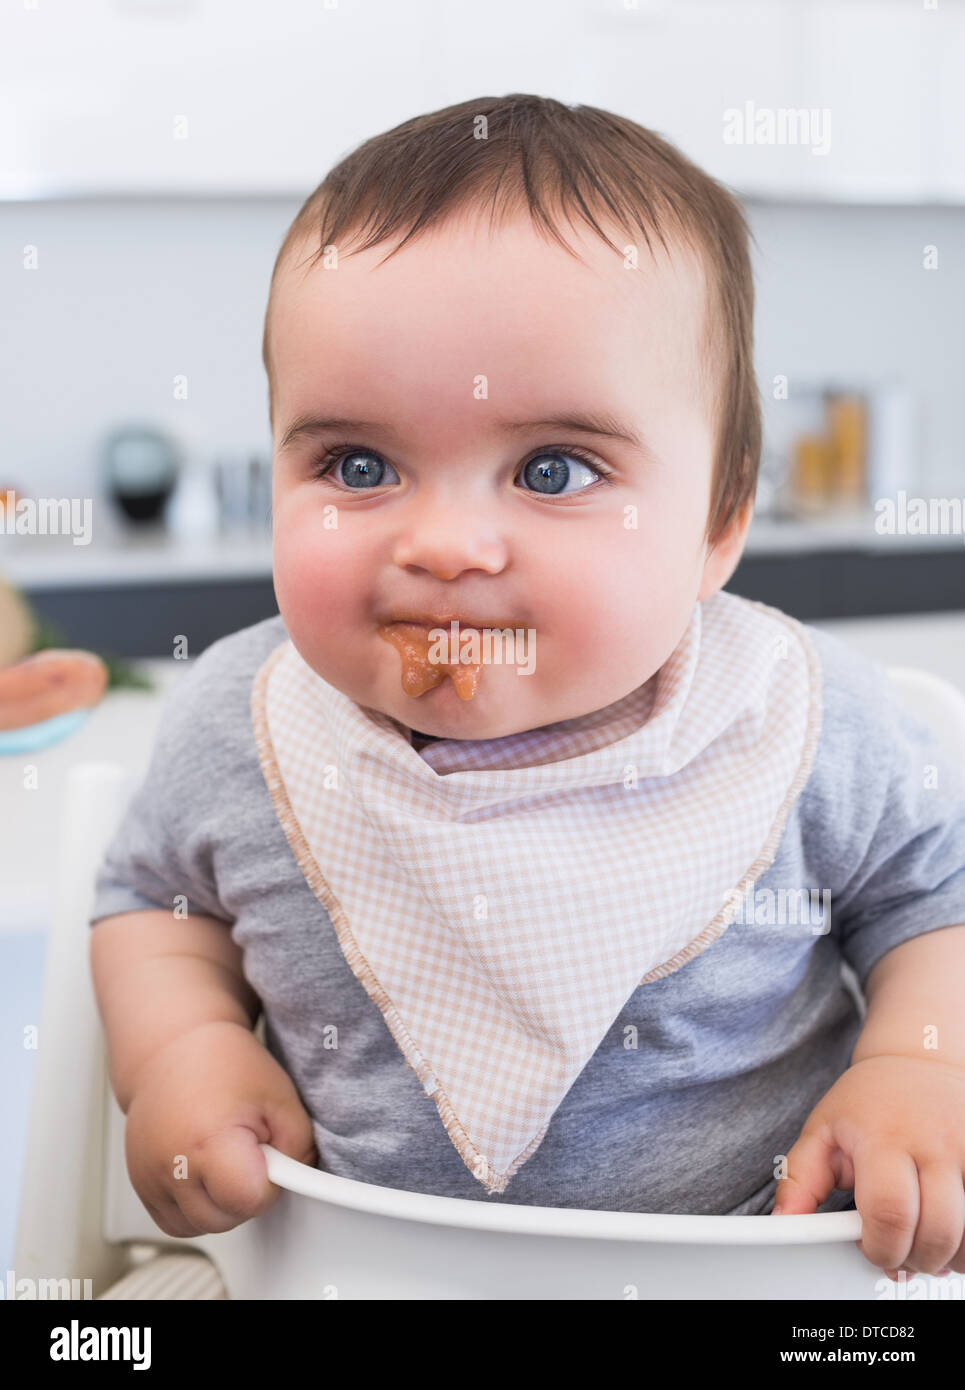 Messy baby eating food Stock Photo